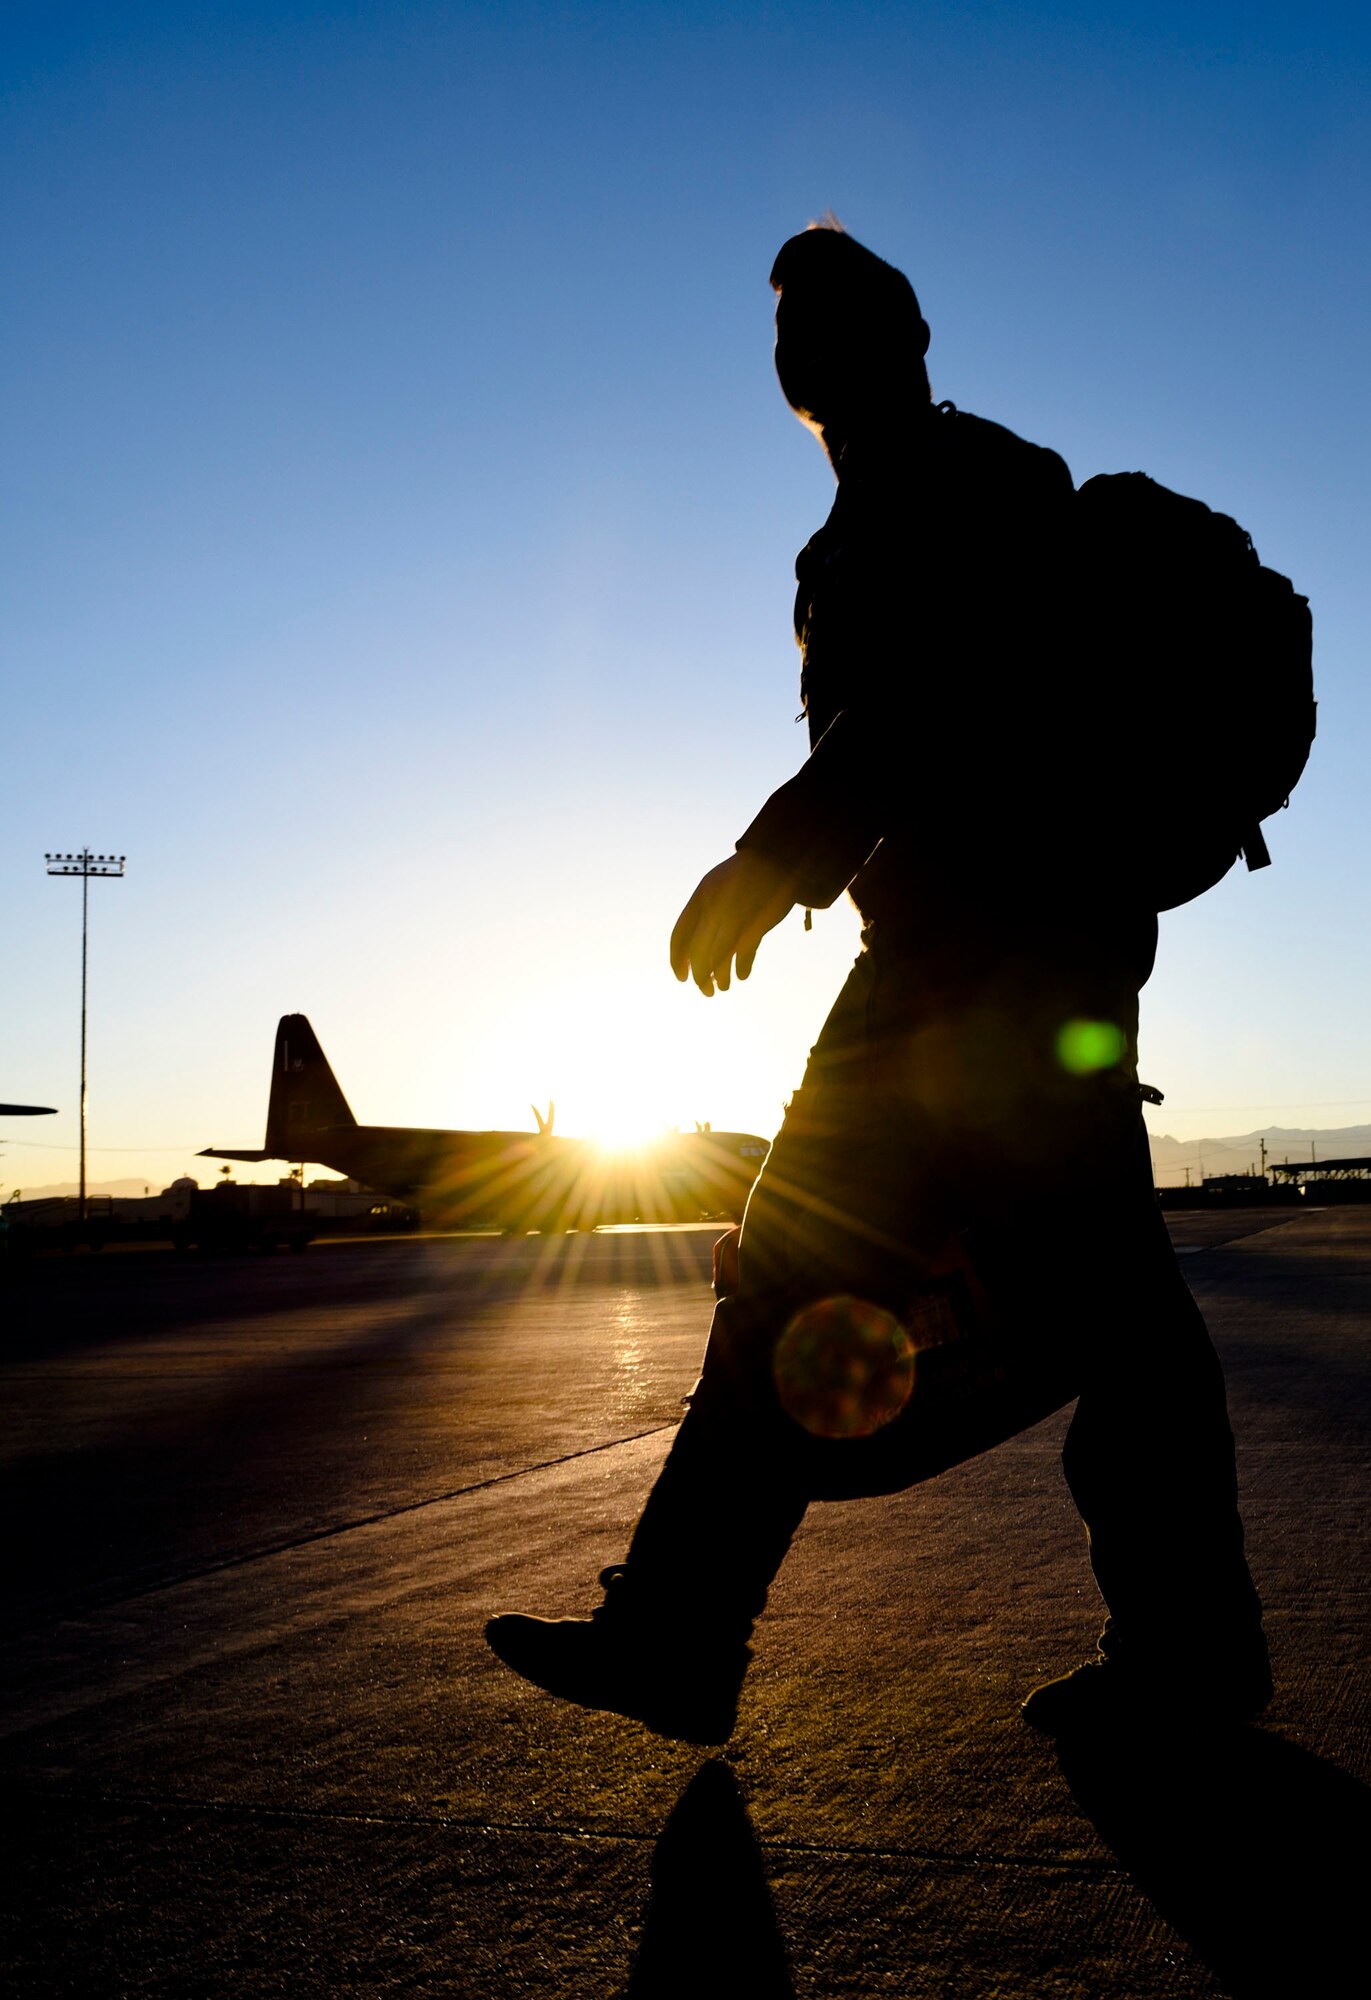 Senior Airman Dan Daley, a boom operator assigned to Fairchild Air Force Base, Wash., walks on the flightline during Red Flag 18-1, Feb. 7, 2018, at Nellis AFB, Nev. Red Flag gives Airmen an opportunity to experience realistic combat scenarios that prepares them for real-world conflicts. (U.S. Air Forcae photo by Airman 1st Class Andrew D. Sarver)